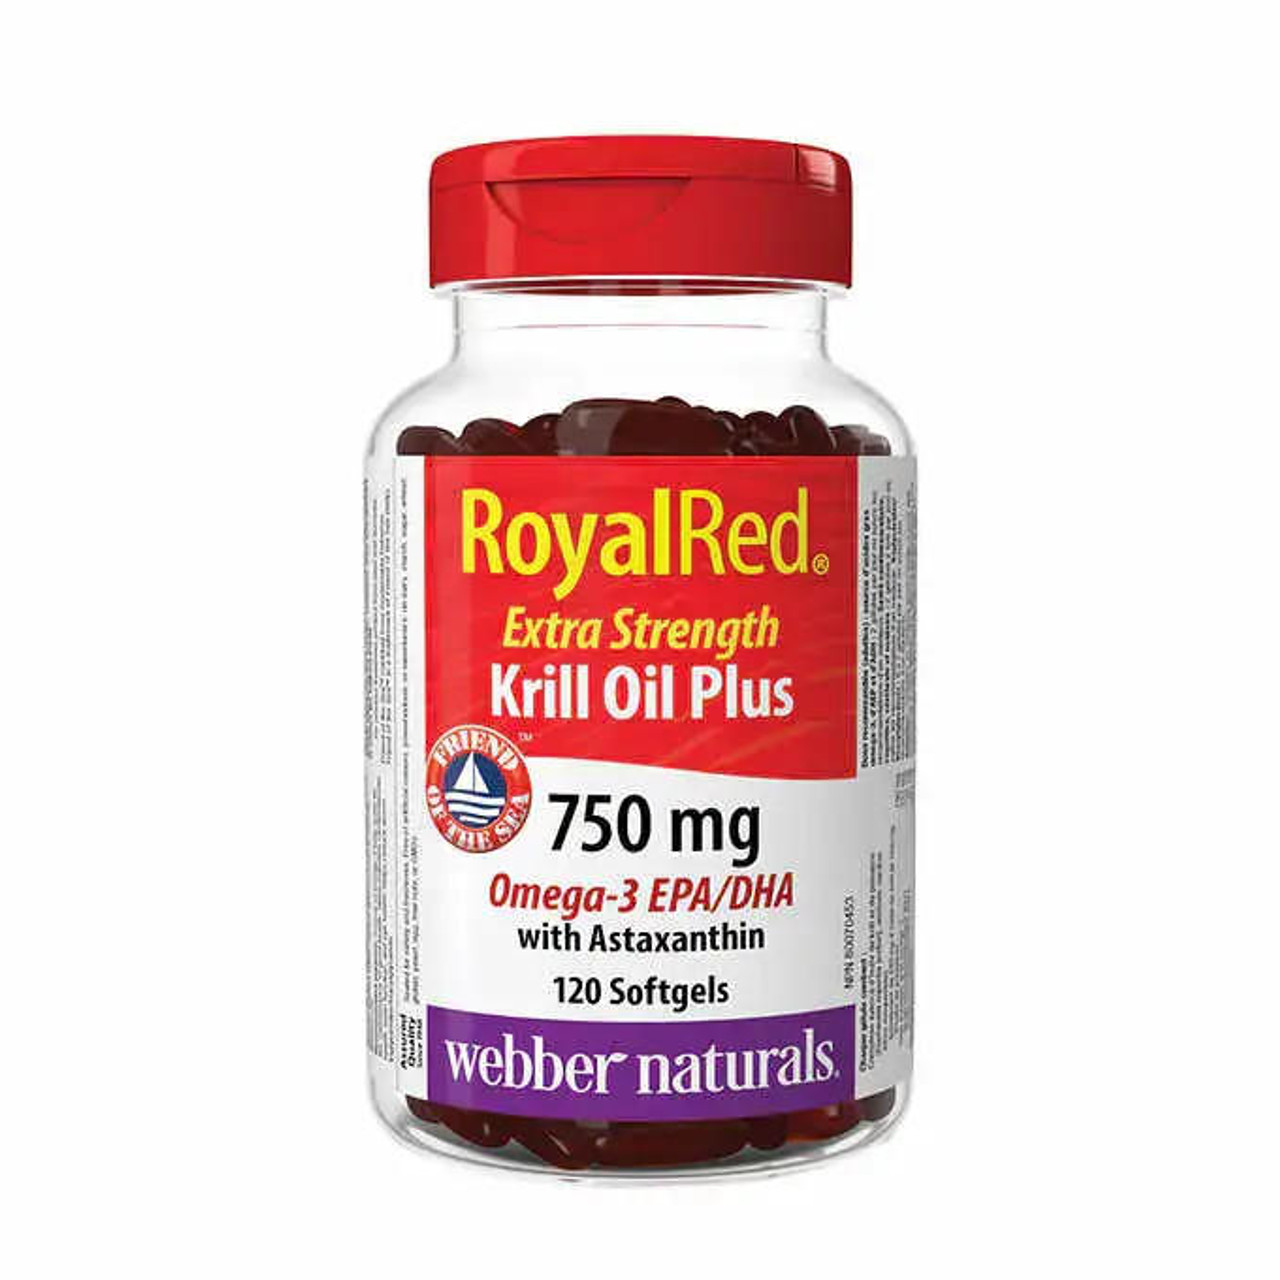 webber naturals Webber Naturals 750 mg Royal Red Krill Oil Plus with Astaxanthin, 120-count | Heart and Joint Health Support 